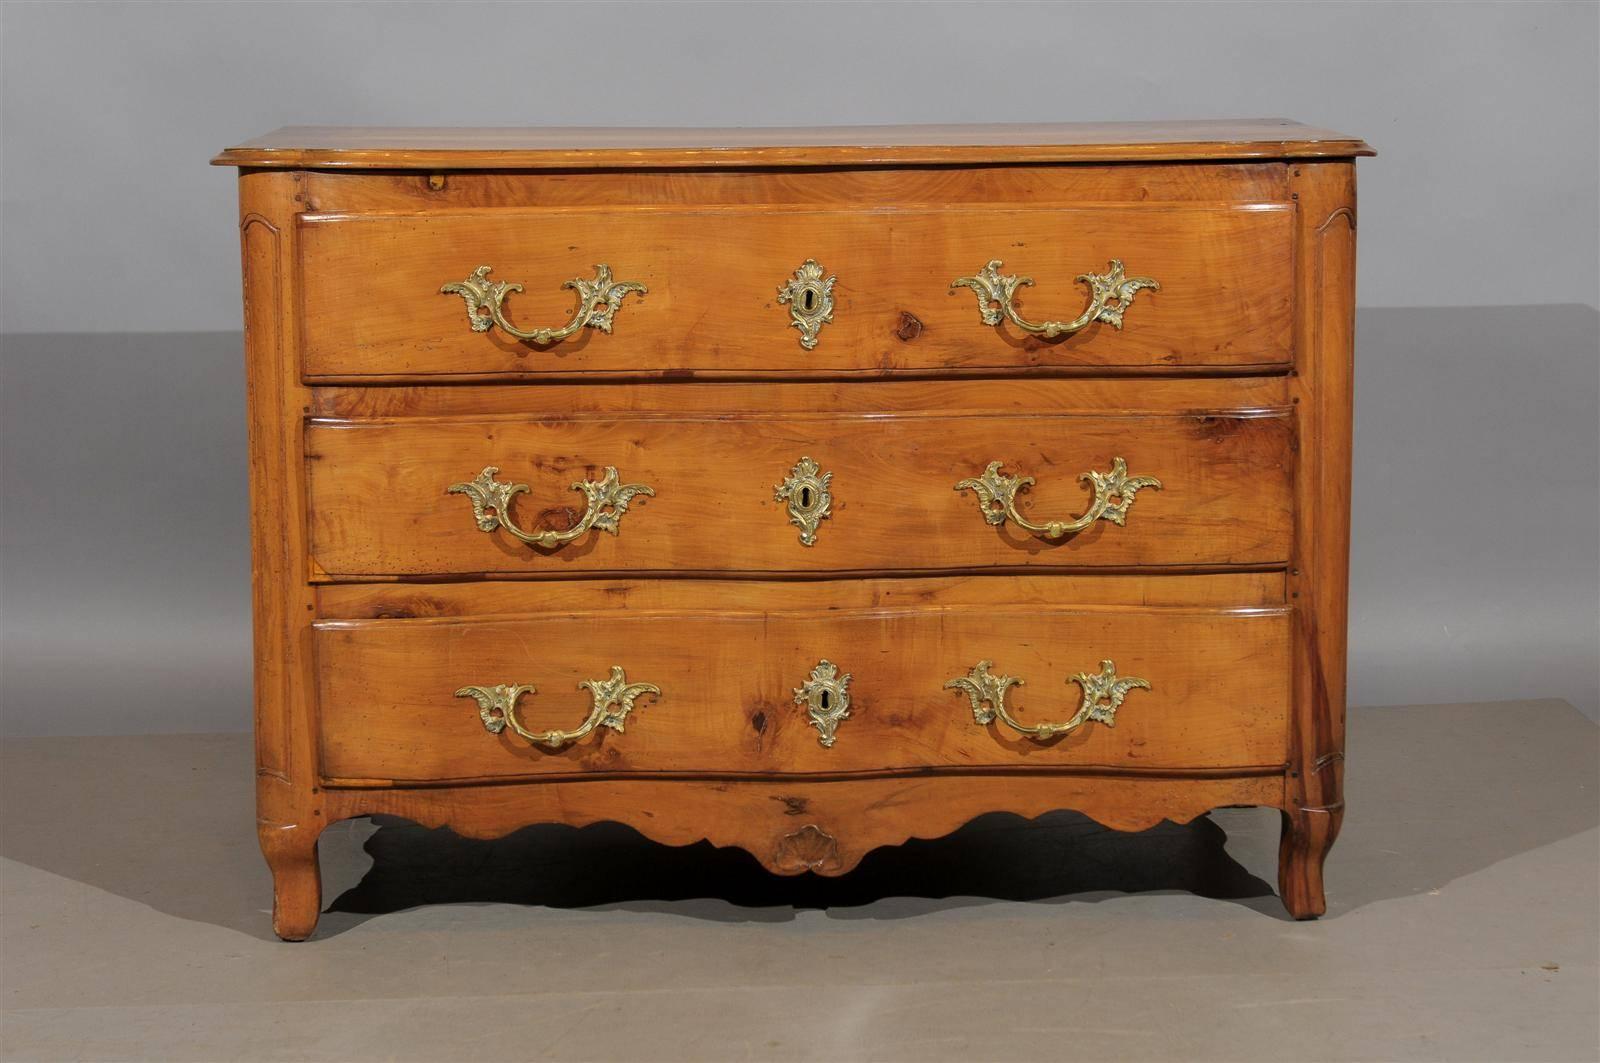 Early 19th century French fruitwood serpentine front commode with 3 drawers, paneled sides, and cabriole feet.